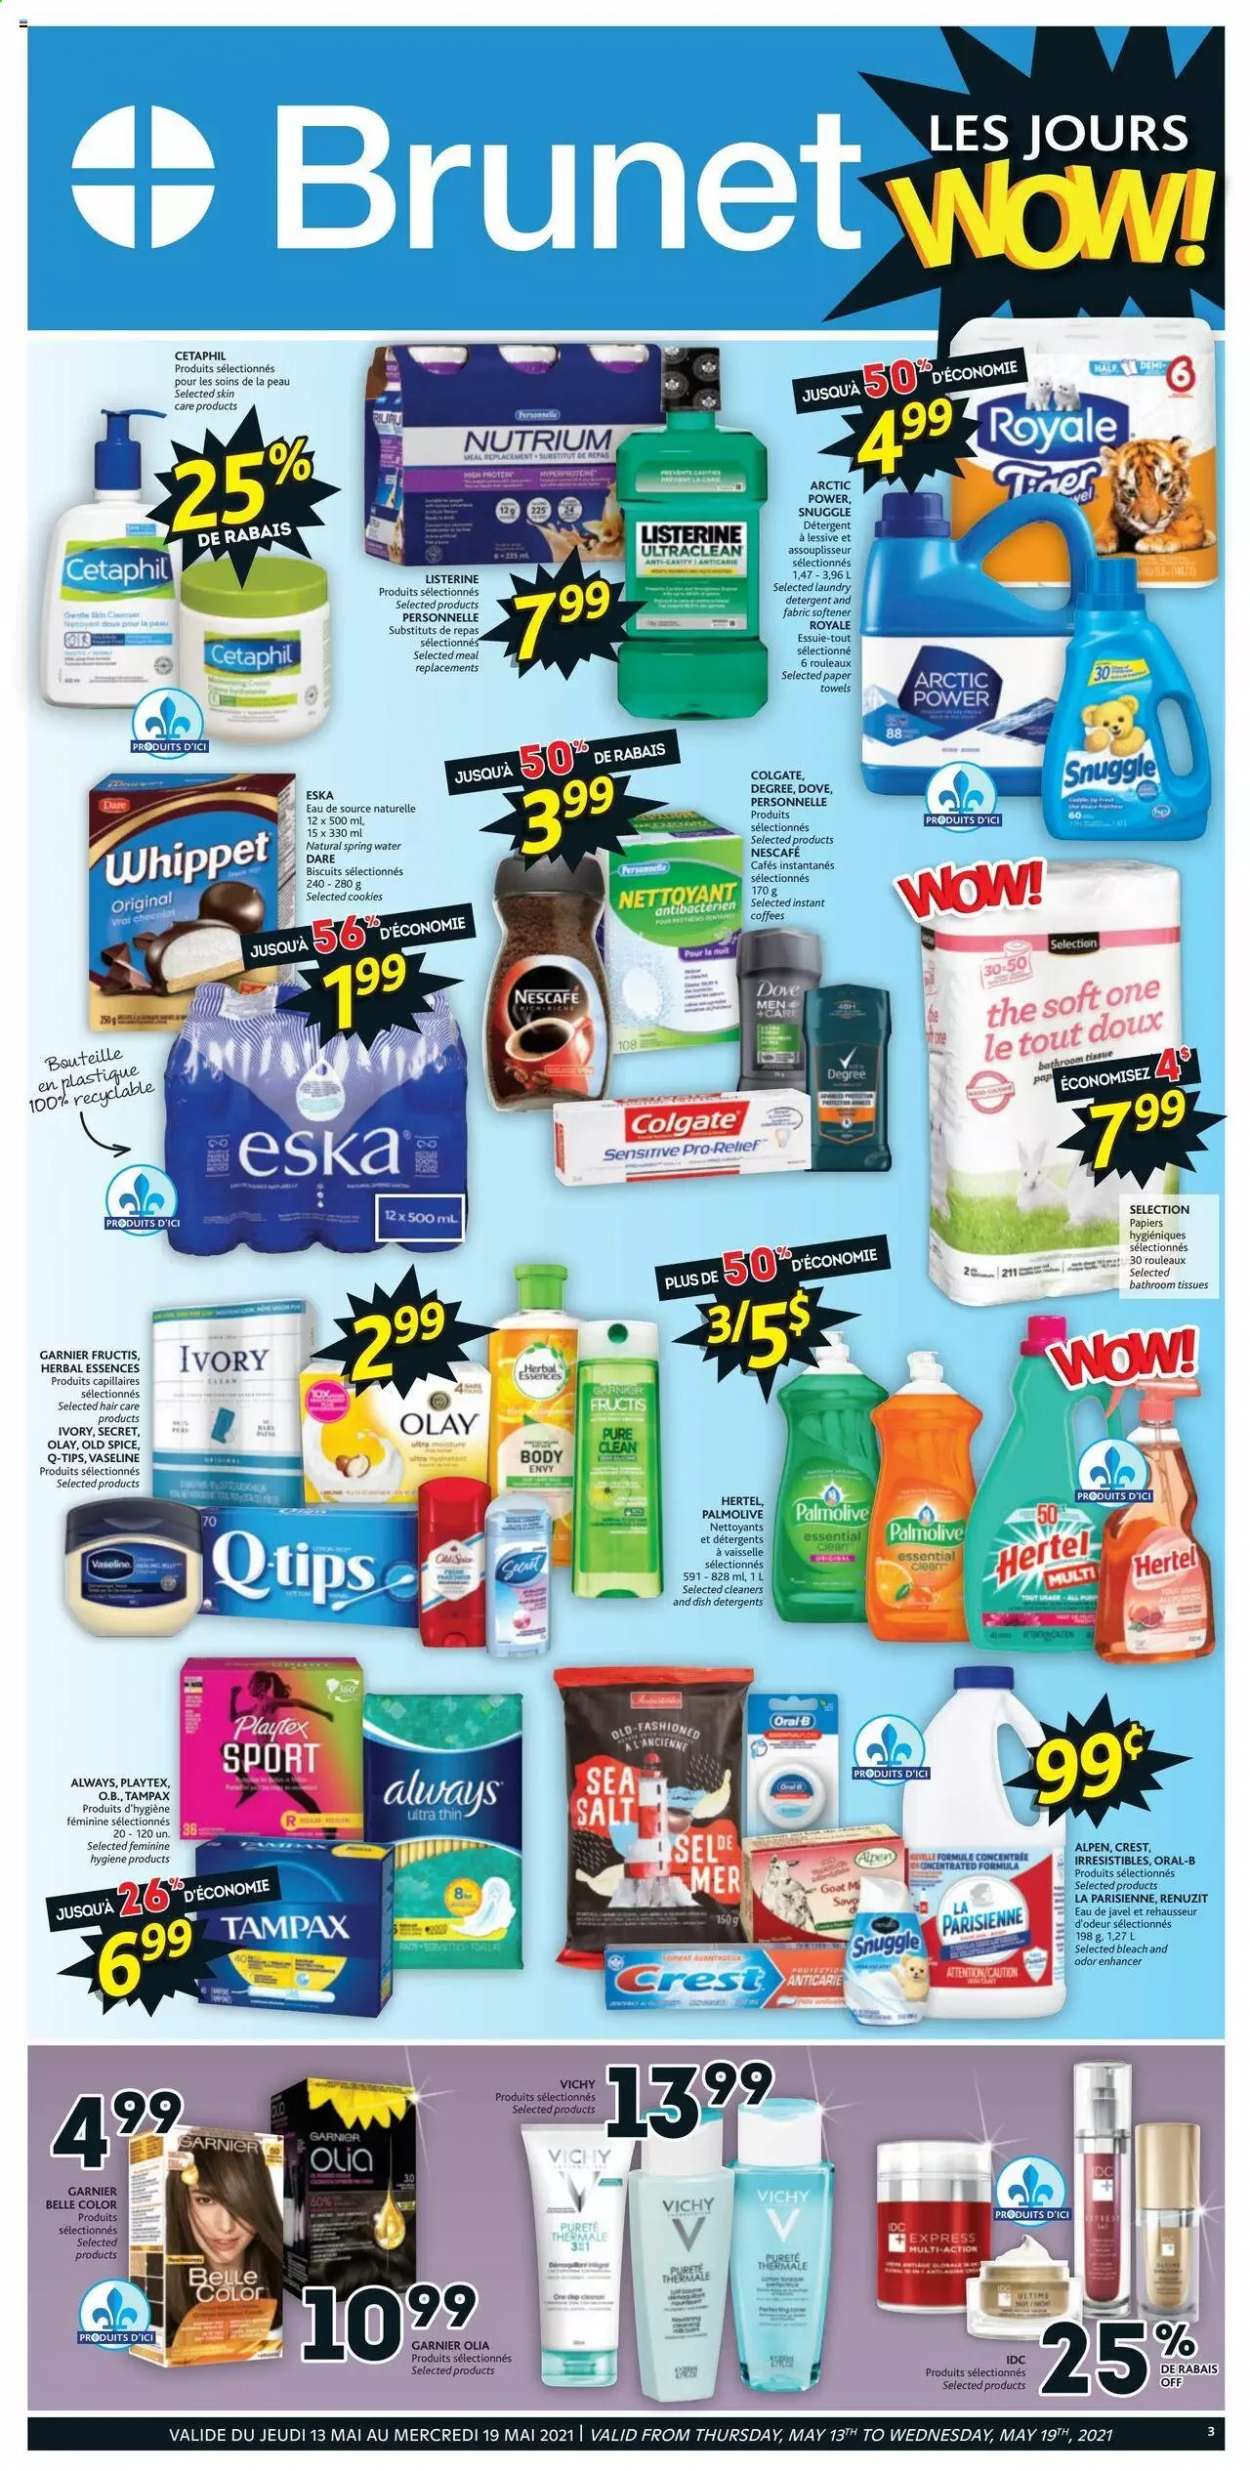 thumbnail - Brunet Flyer - May 13, 2021 - May 19, 2021 - Sales products - toilet paper, tissues, kitchen towels, paper towels, bleach, Snuggle, fabric softener, laundry detergent, Vichy, Palmolive, Vaseline, Crest, Playtex, Olay, Herbal Essences, Fructis, Garnier, Listerine, Tampax, Old Spice, Oral-B, Nescafé. Page 1.